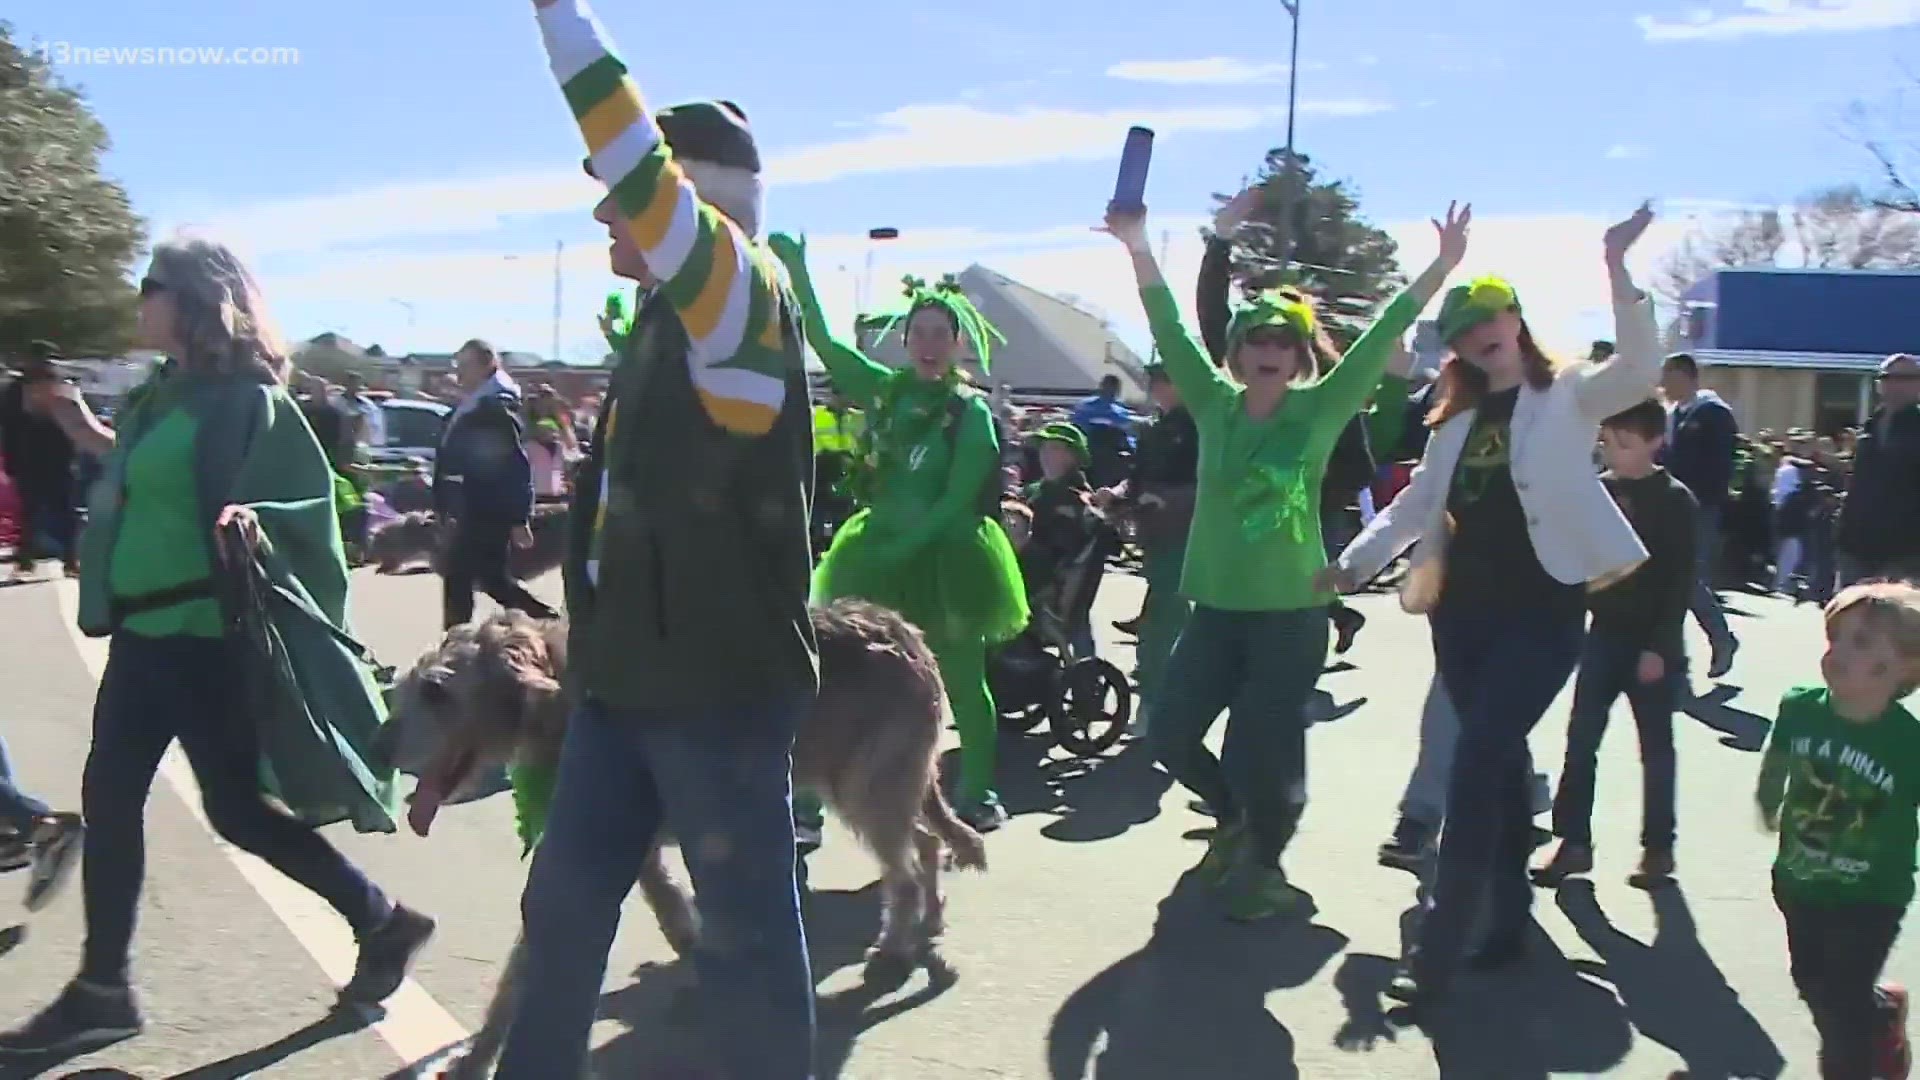 After a three-year hiatus, the Ocean View St. Patrick's Day Parade is back, but the luck of the Irish wasn't there for some drivers along Granby Street.